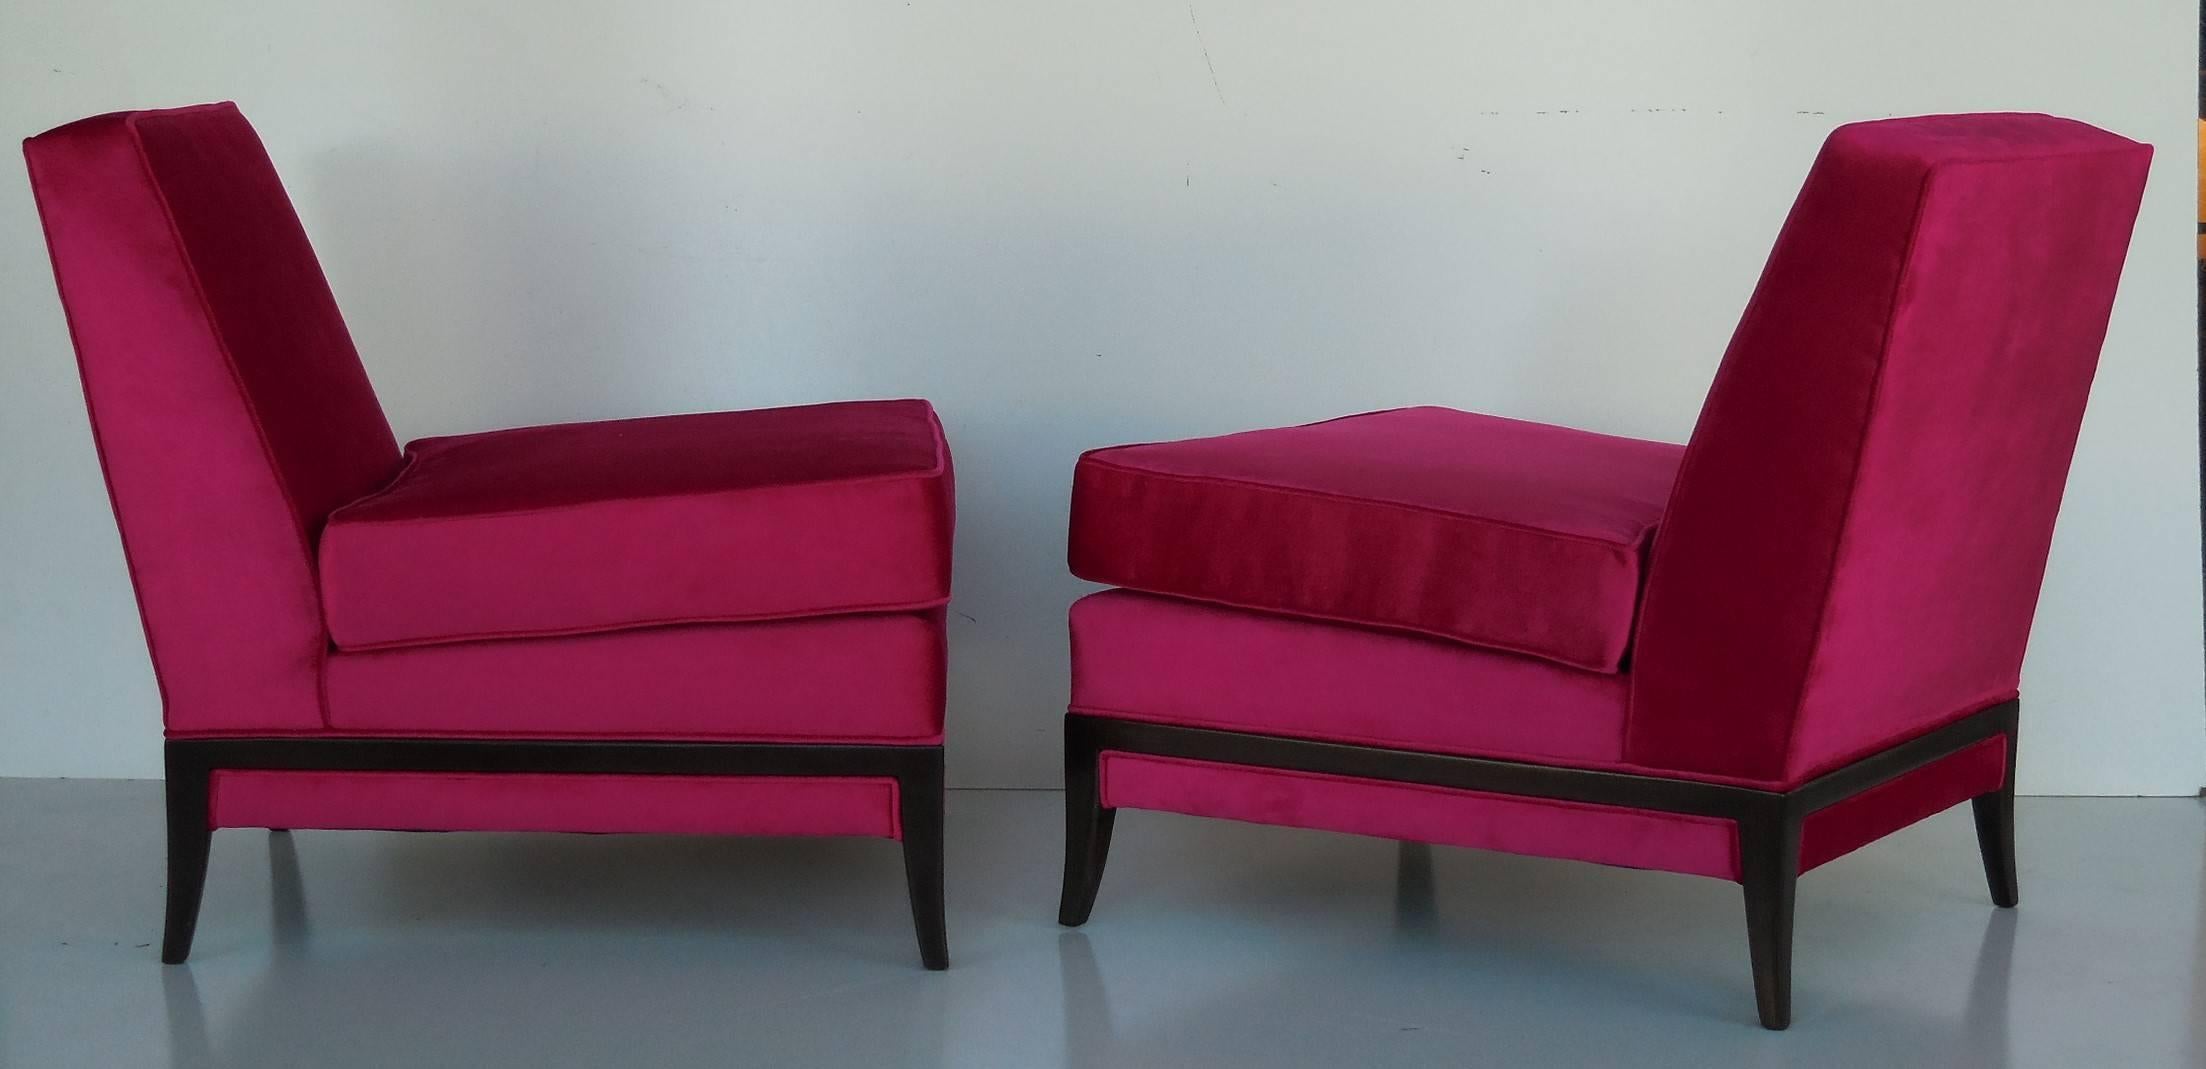 American Pair of Midcentury Tommi Parzinger Lounge Chairs